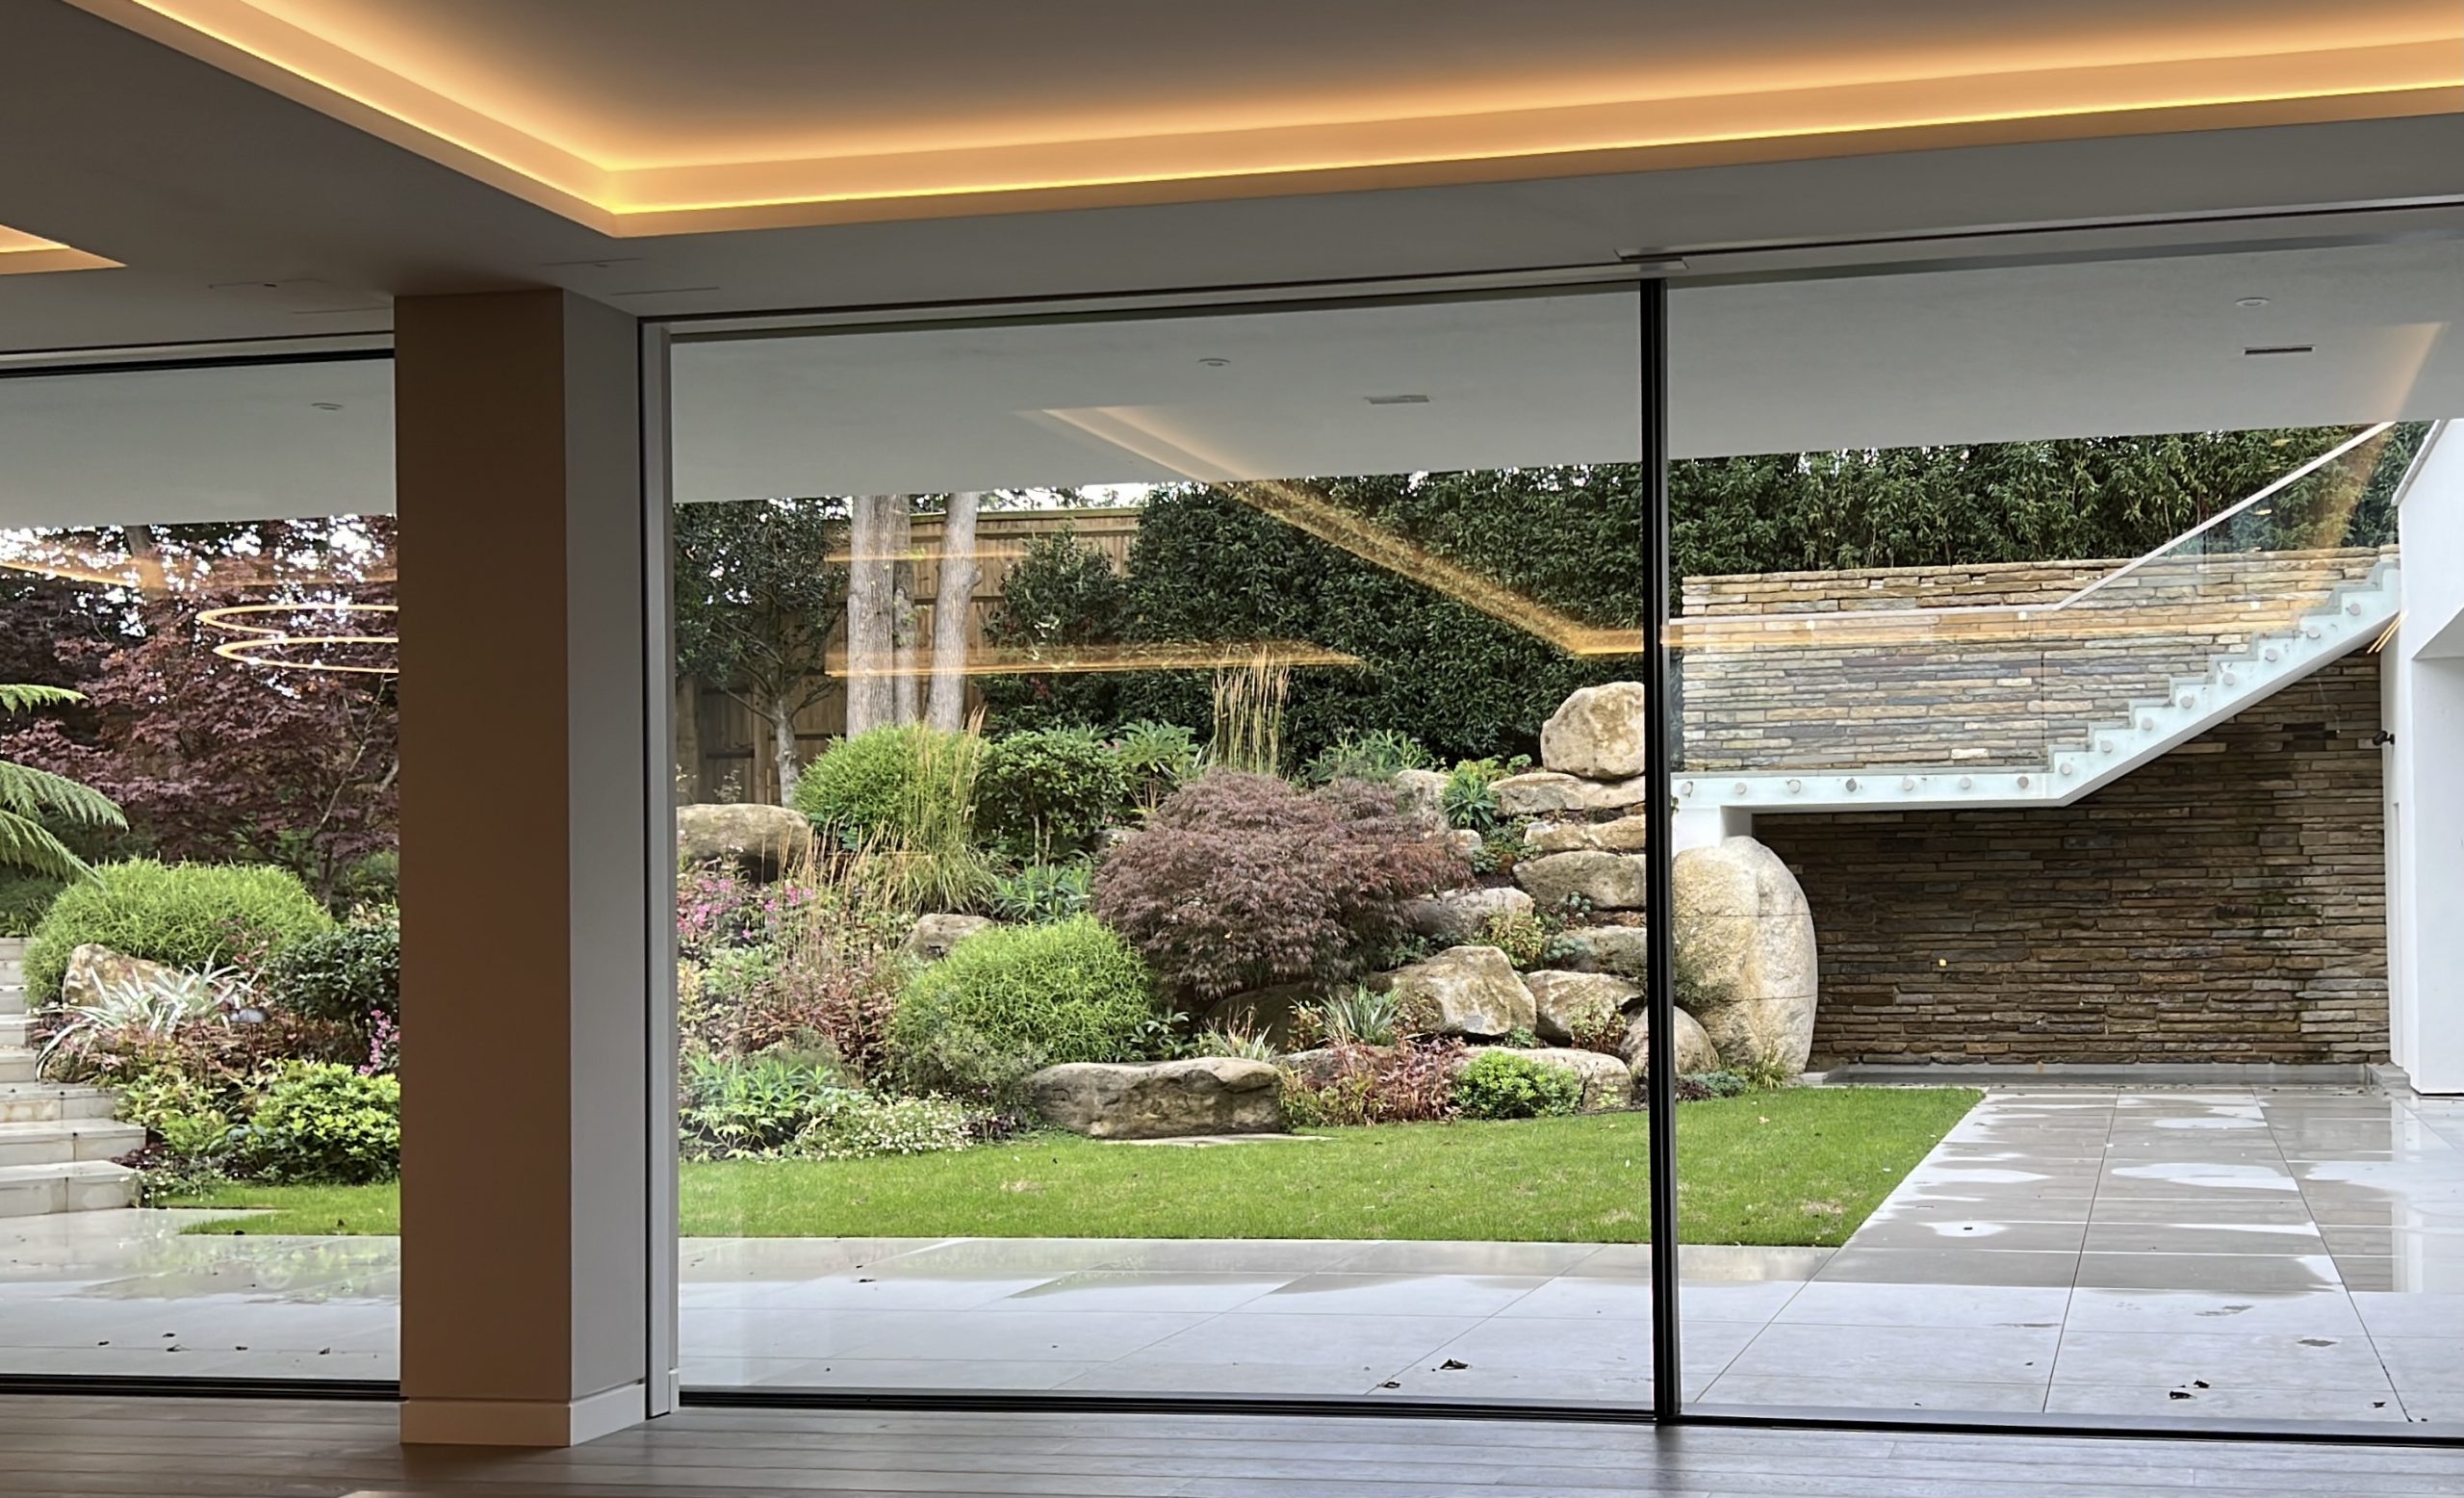 Automated doors, connected to the Lutron intelligent ligthing system.